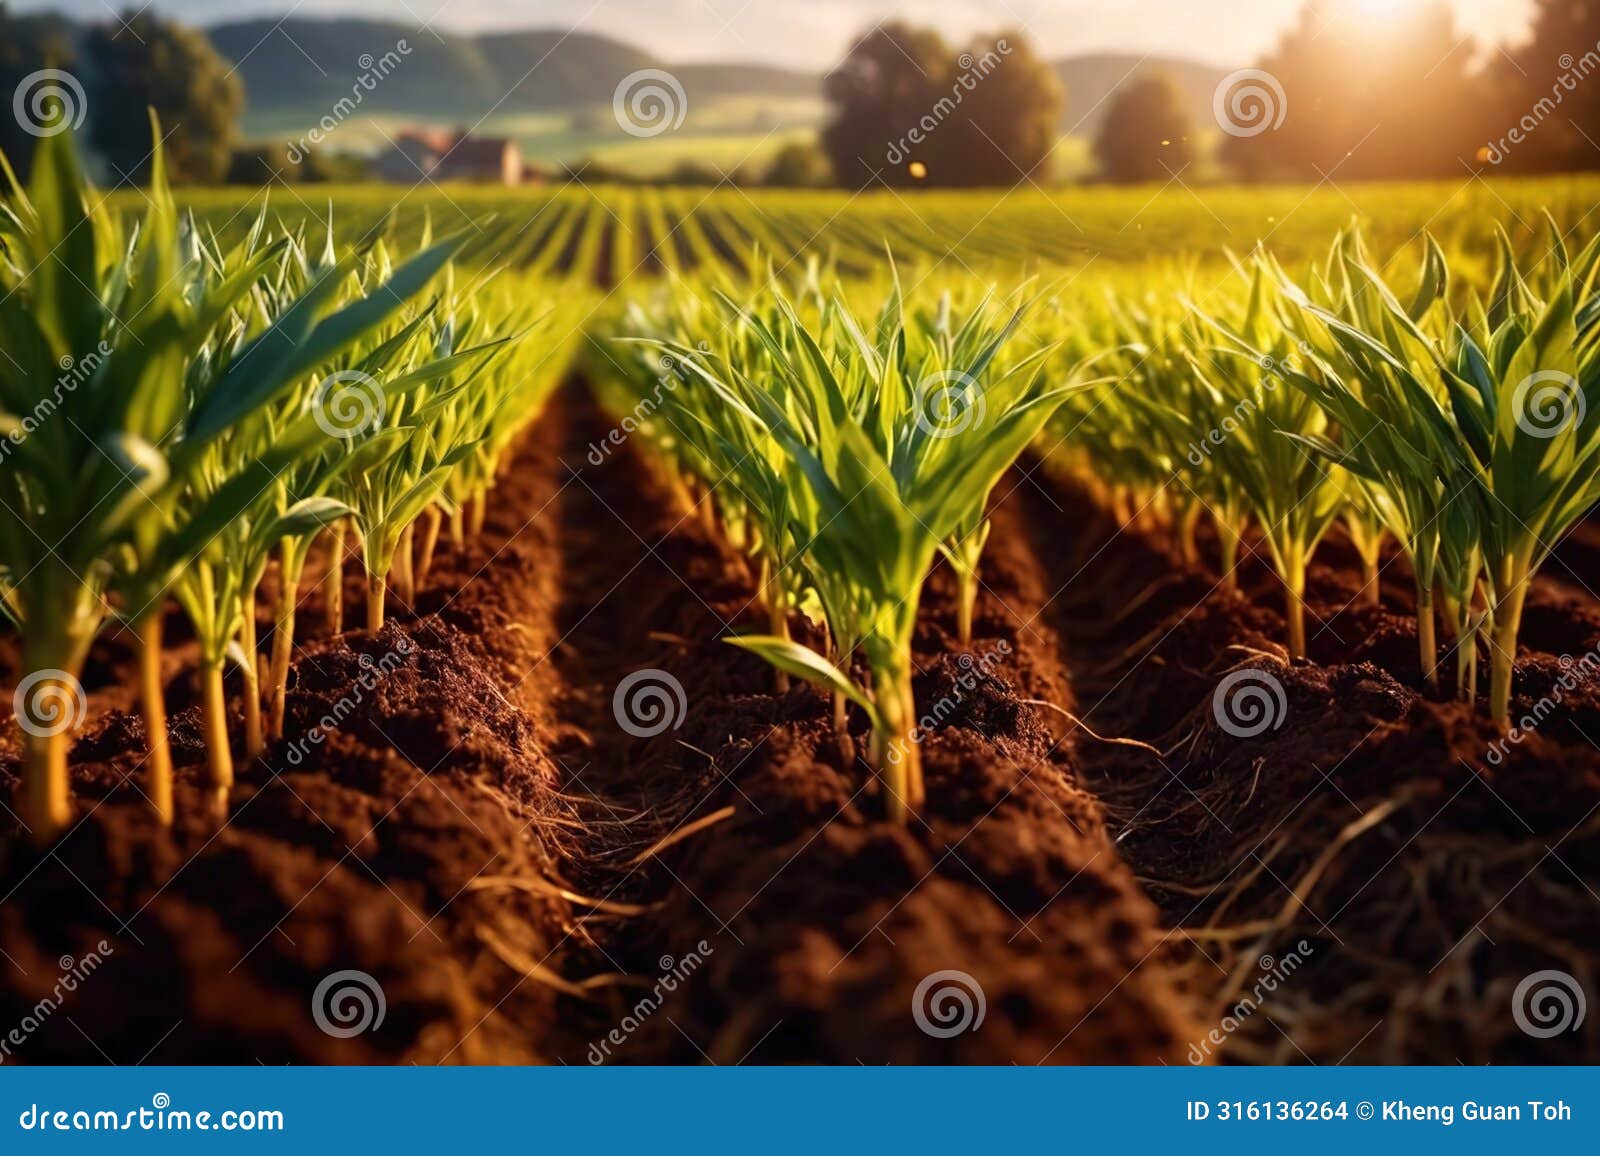 modern industrialized agriculture using technology, agritech farming of crops